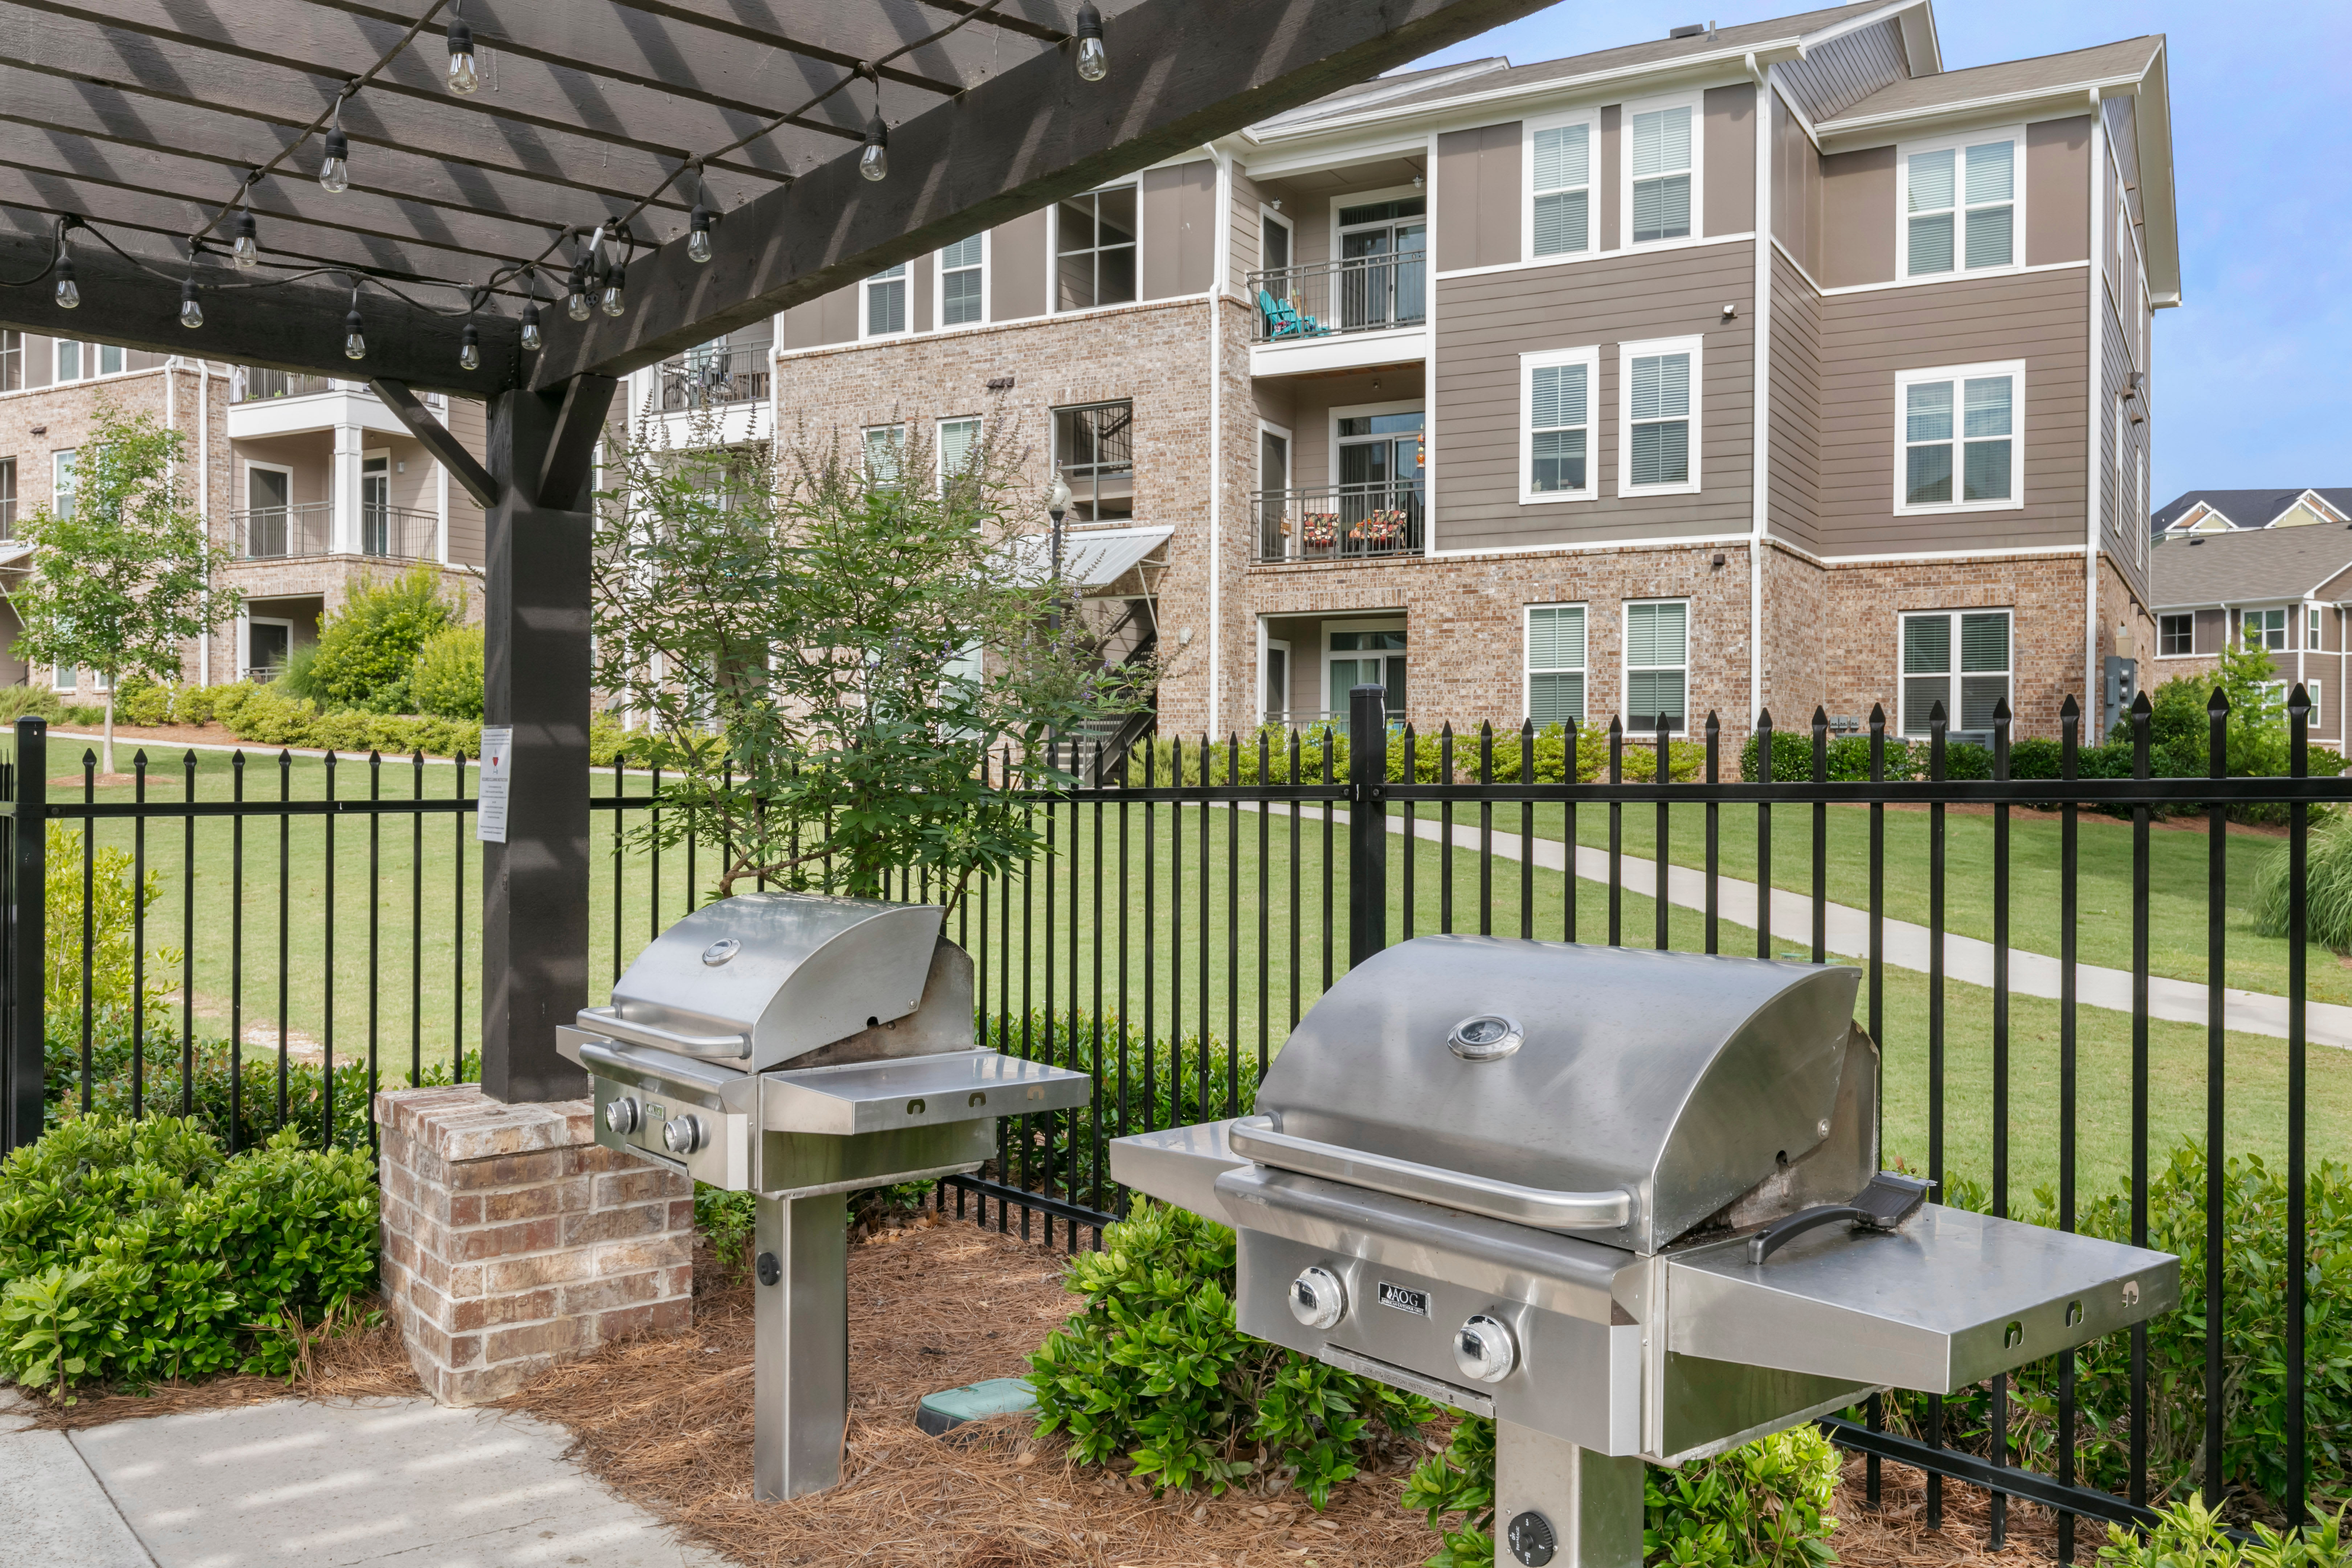 Grilling stations at The Village at Apison Pike in Ooltewah, Tennessee